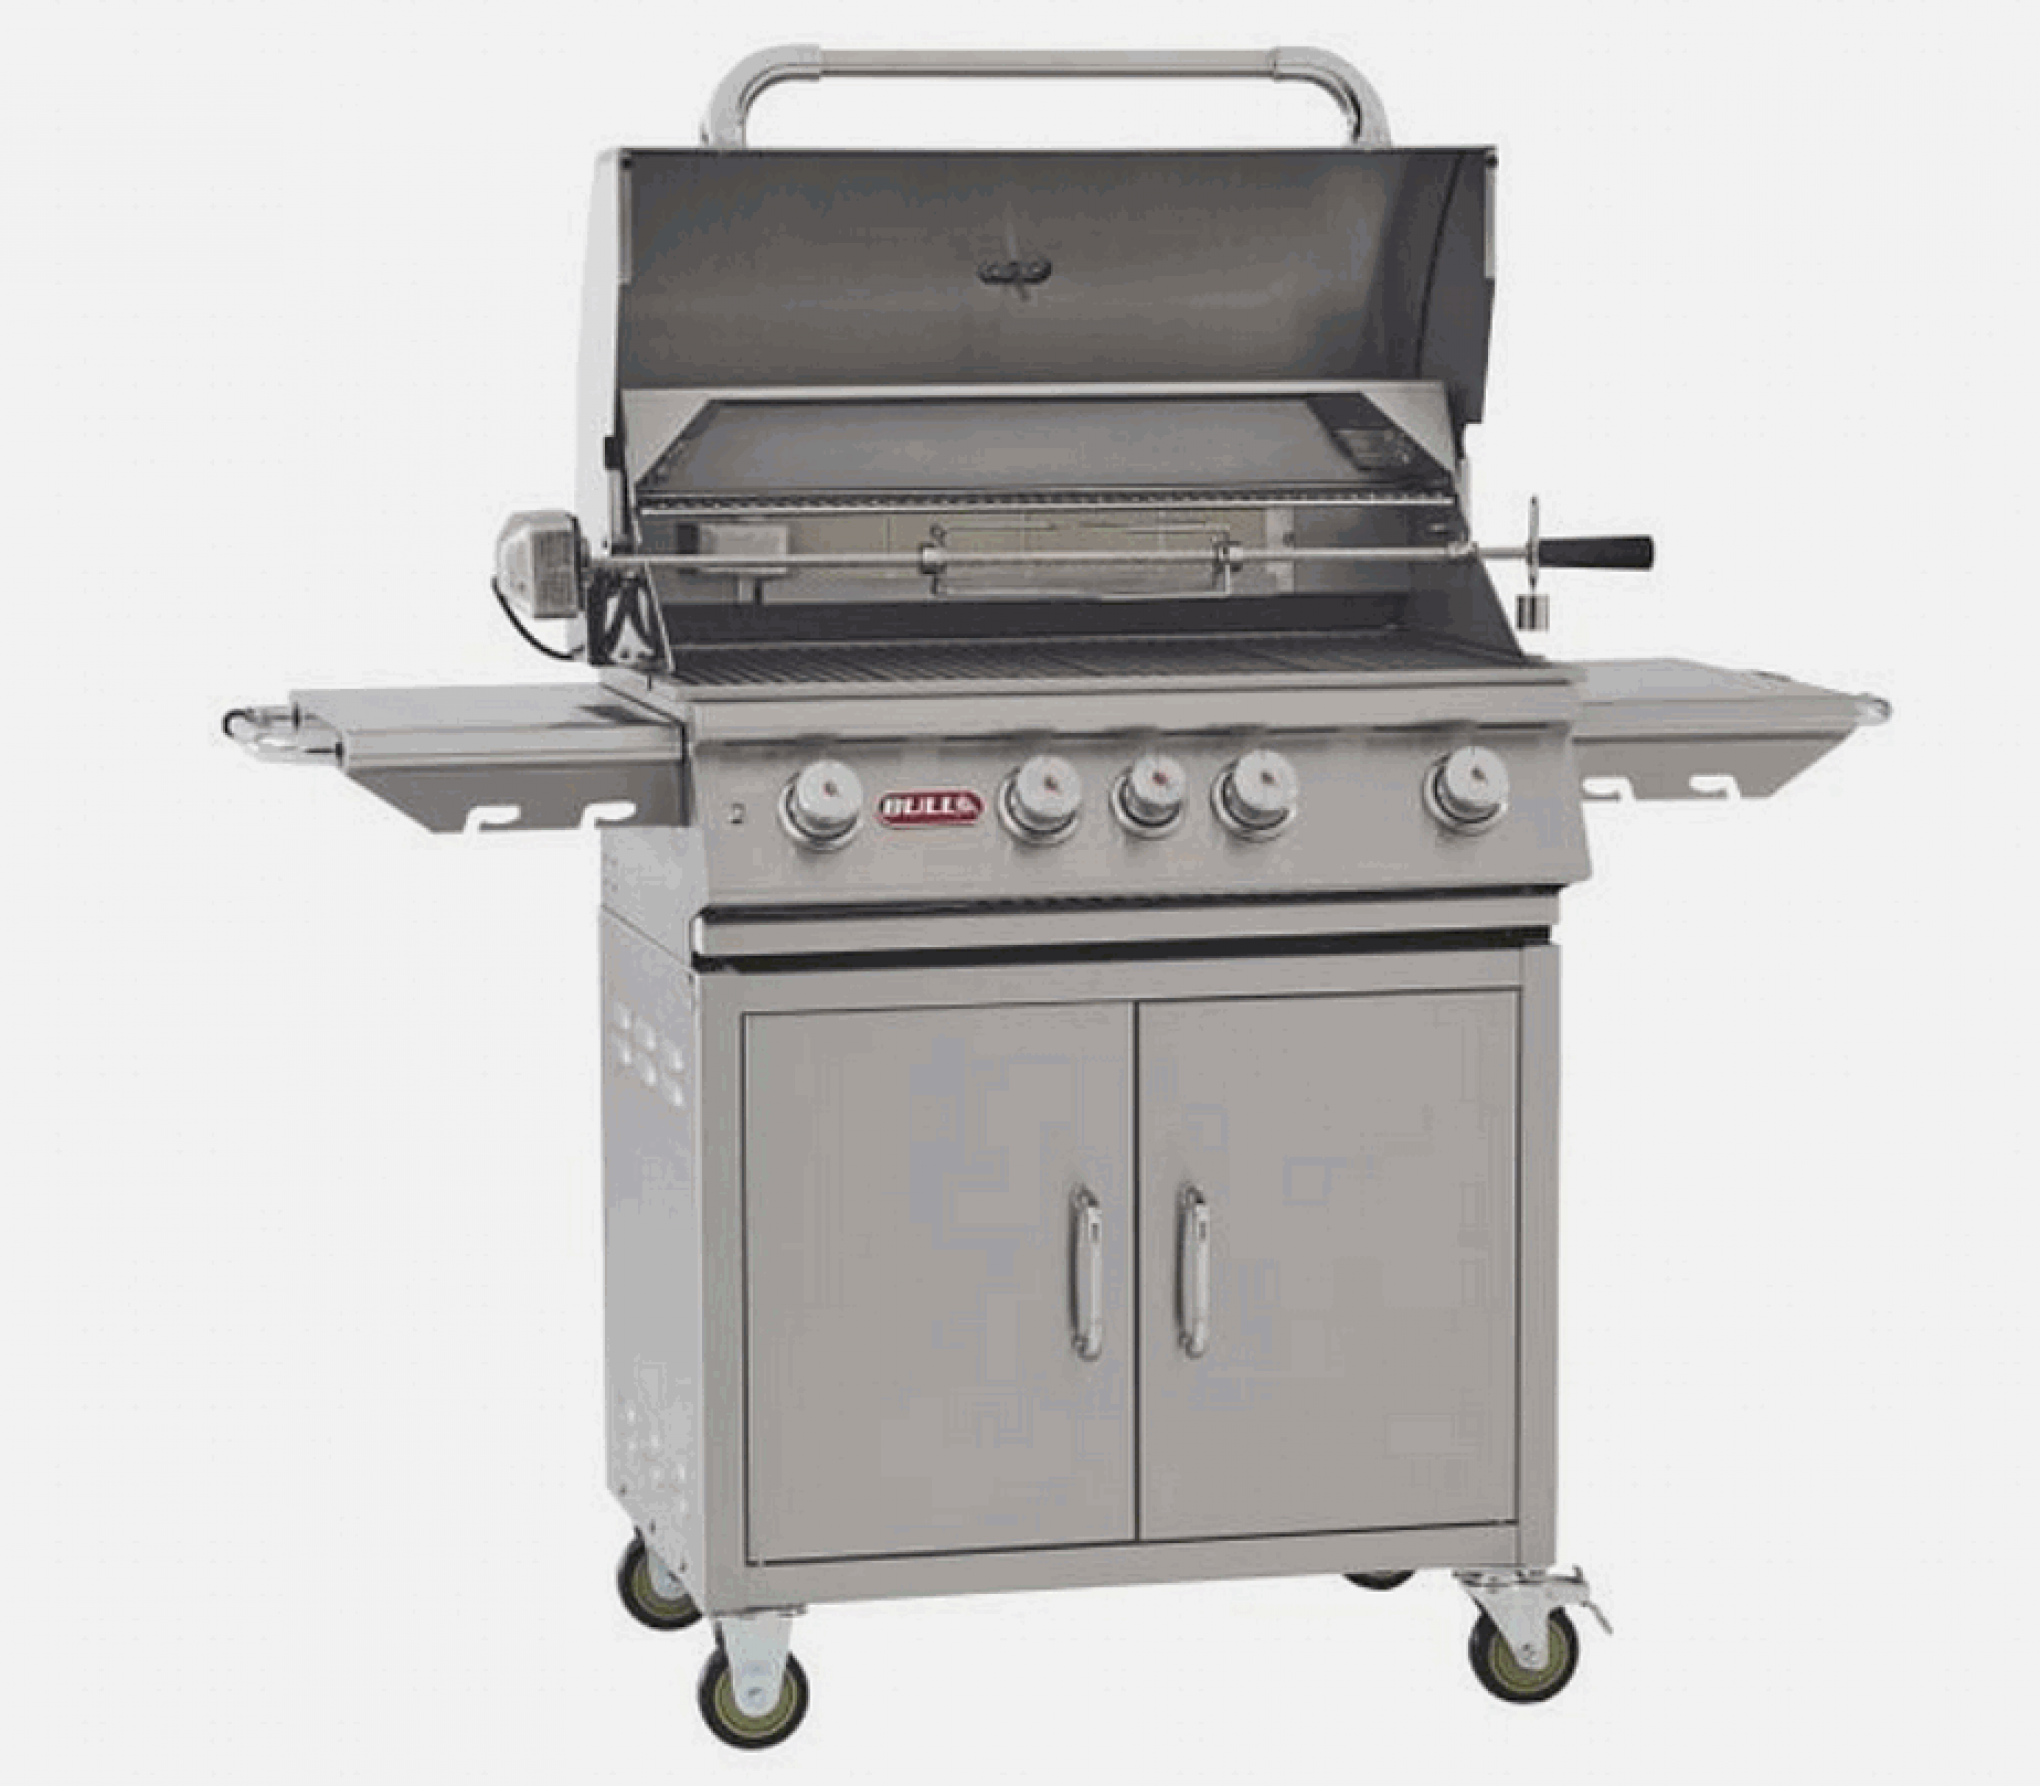 Bull Angus 30" Natural Gas Grill on a Cart, Stainless Steel